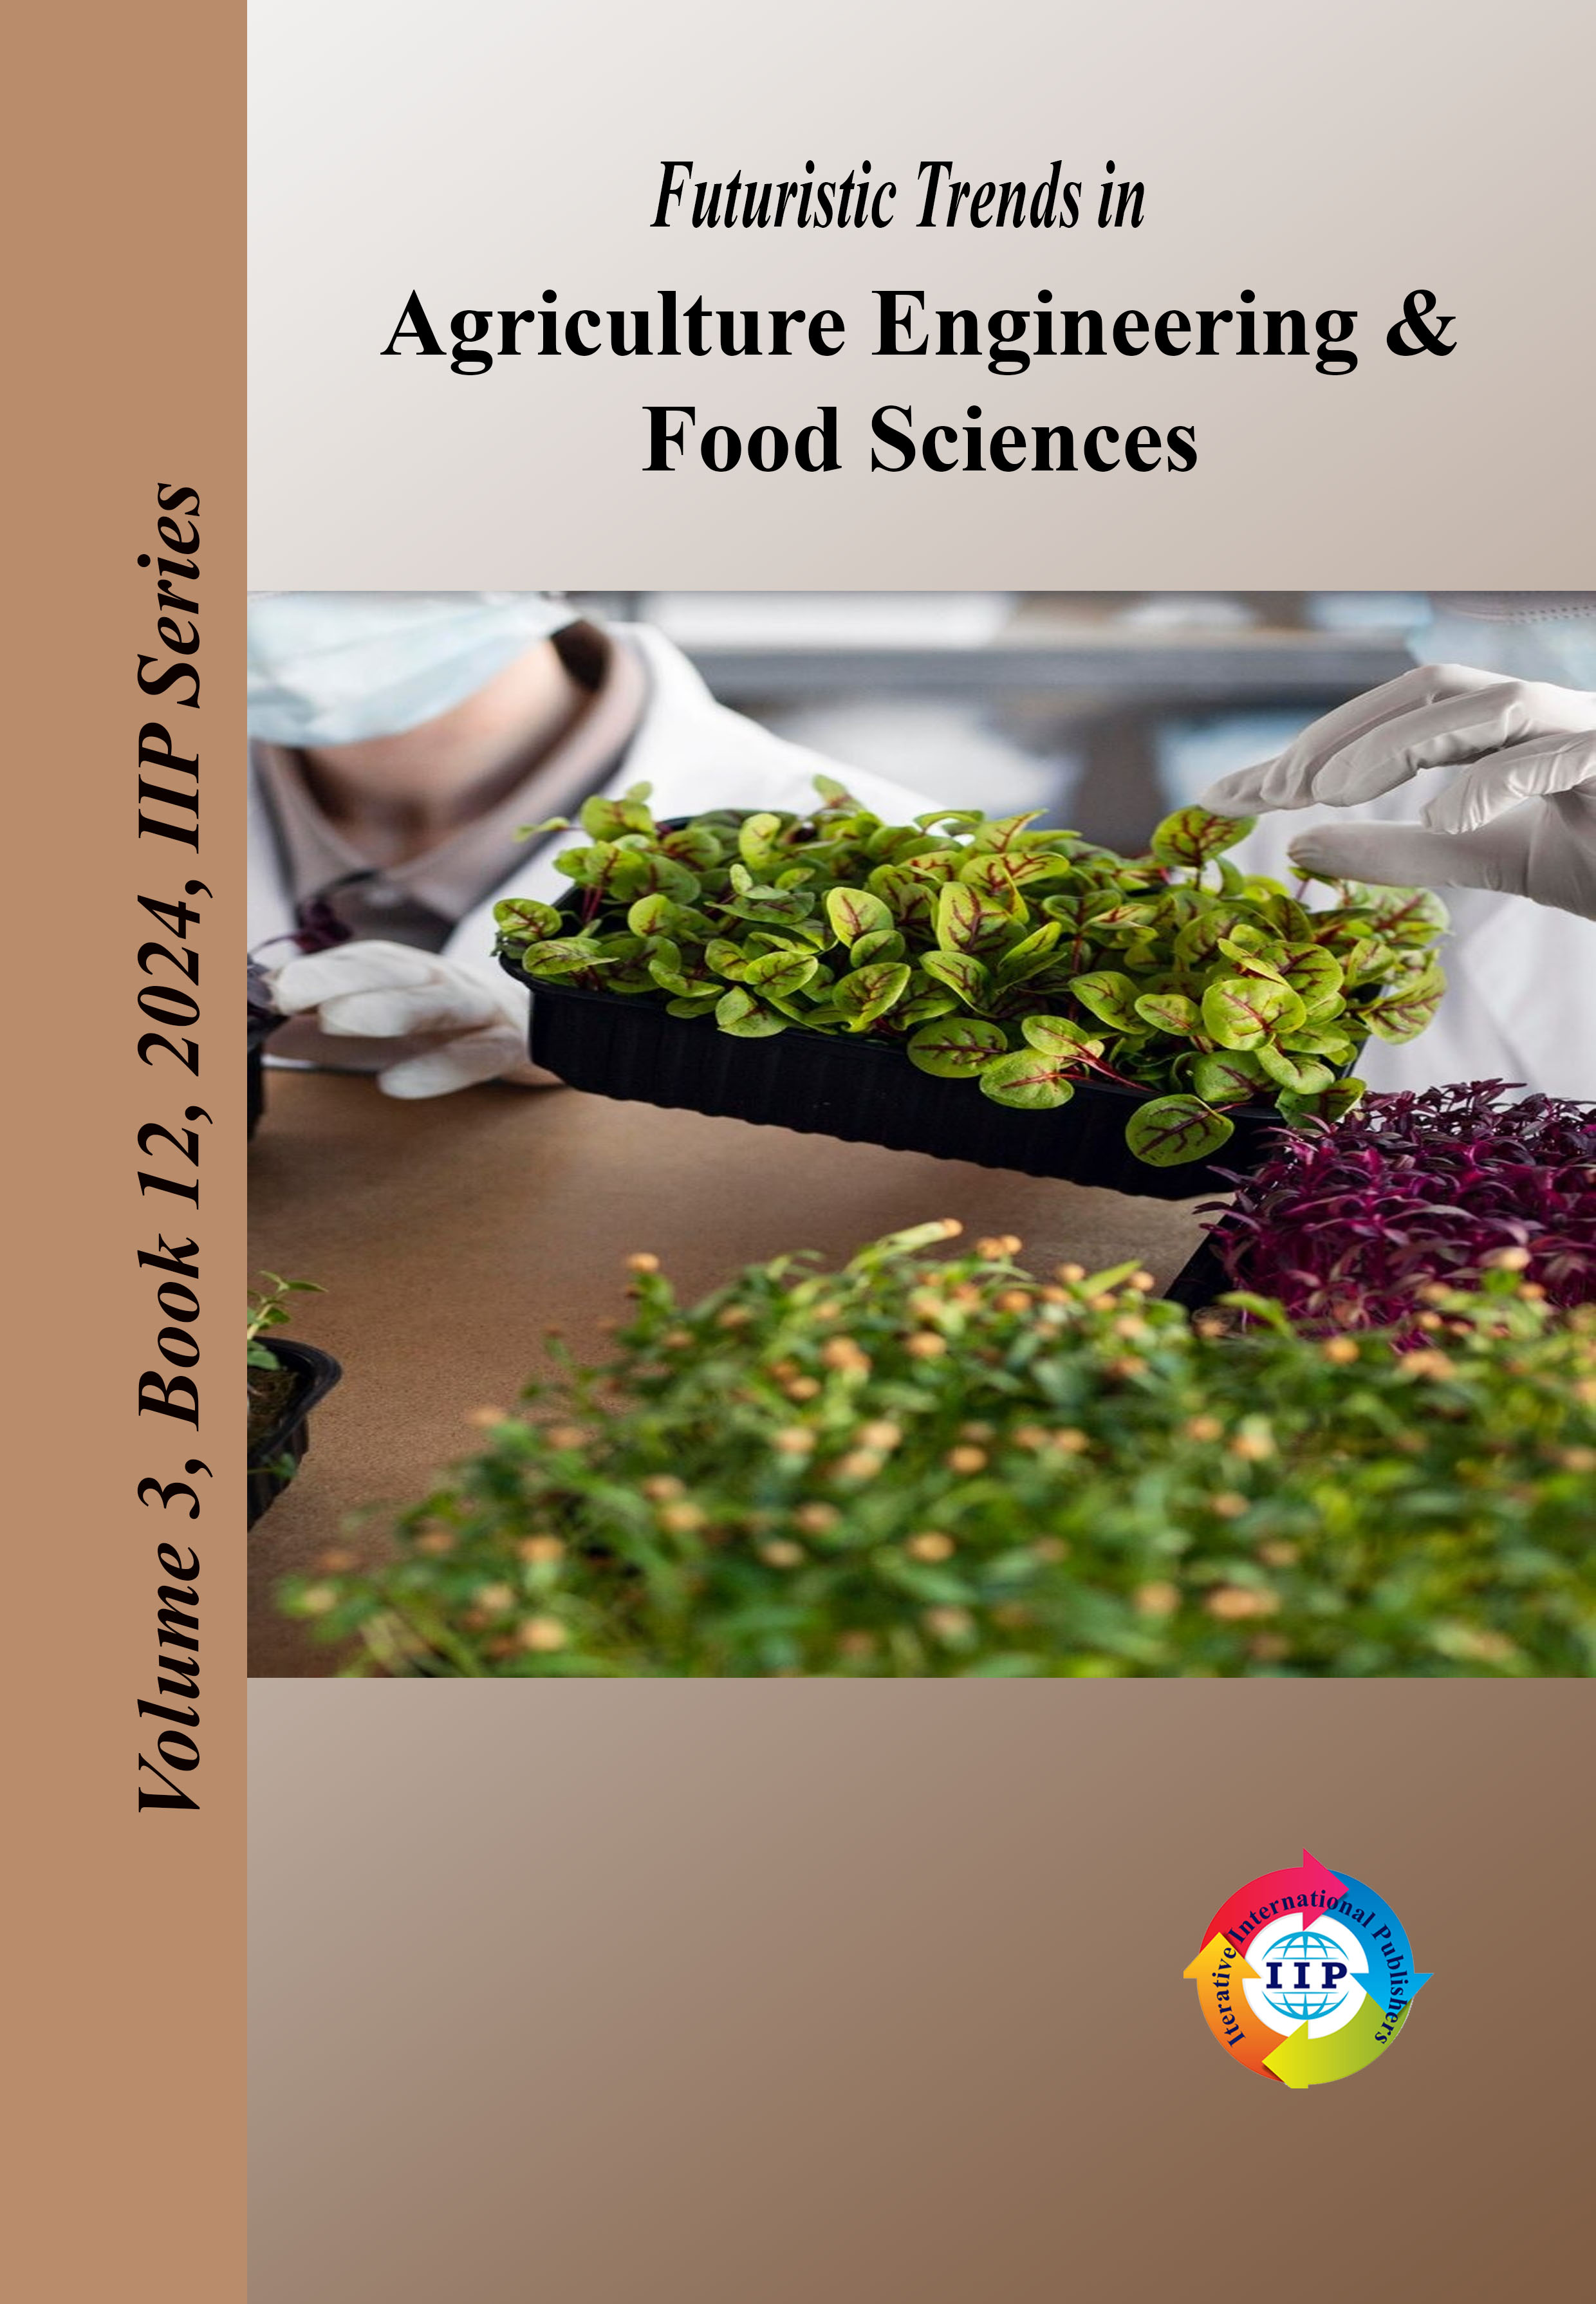 Futuristic Trends in Agriculture Engineering & Food Sciences Volume 3 Book 12